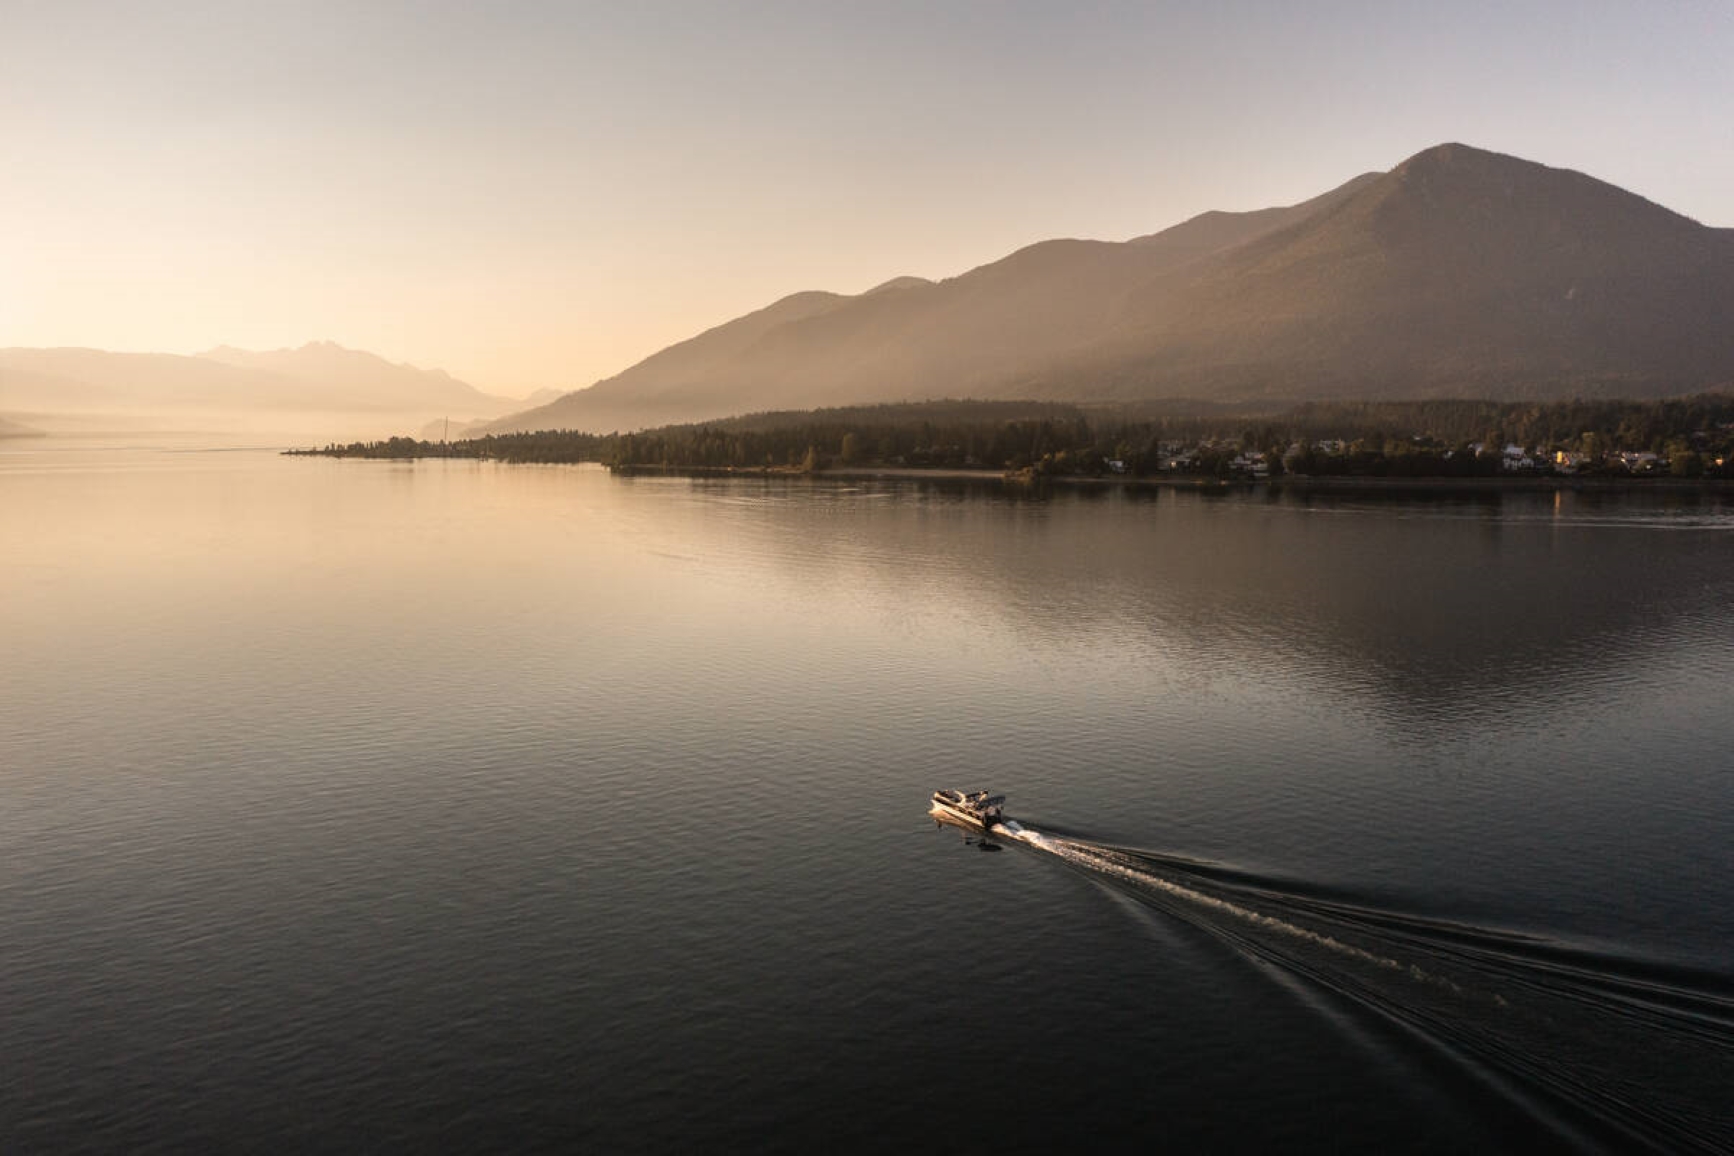 Boat in the lake, with a reflection of the mountain in the distance during sunset. Photo credit: Destination BC